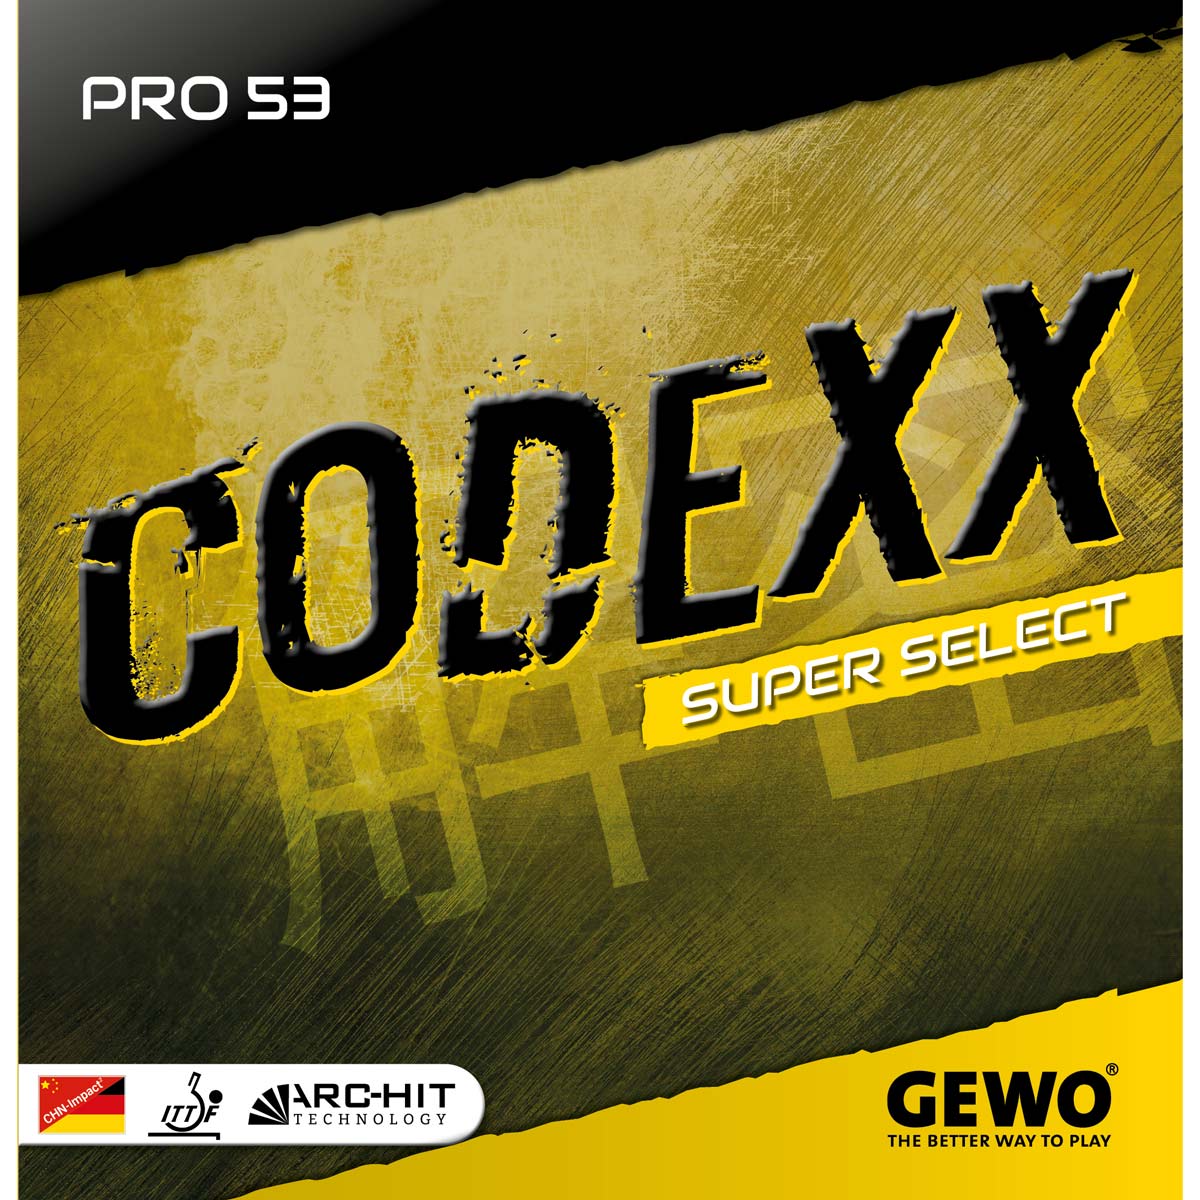 GEWO Codexx Pro 53 SuperSelect - Table Tennis Rubber